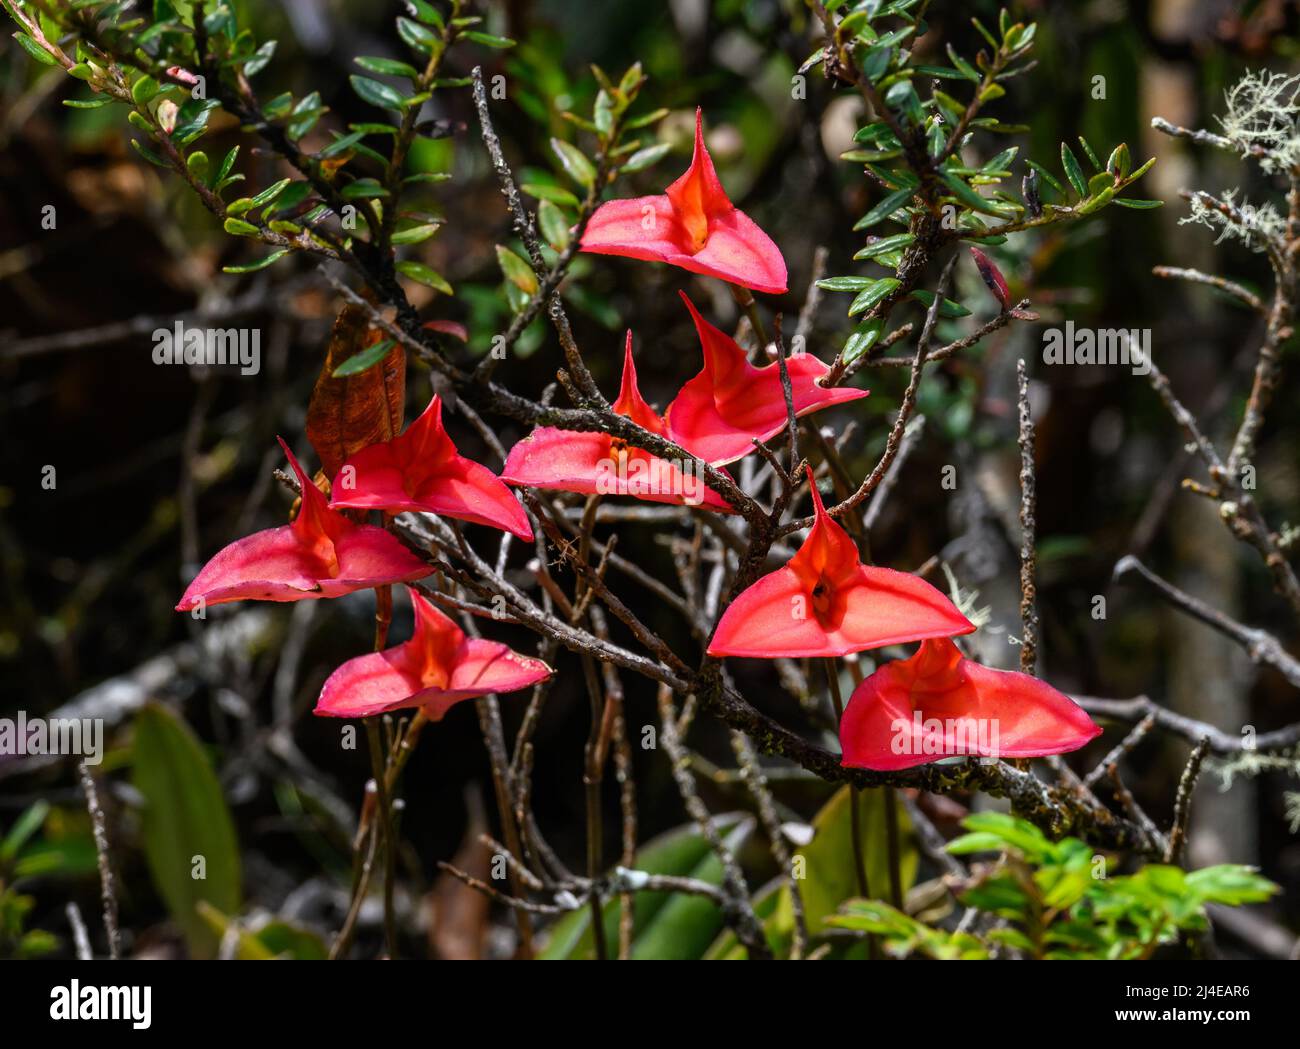 A cluster of red flowers of Masdevallia orchids in full bloom. Colombia, South America. Stock Photo